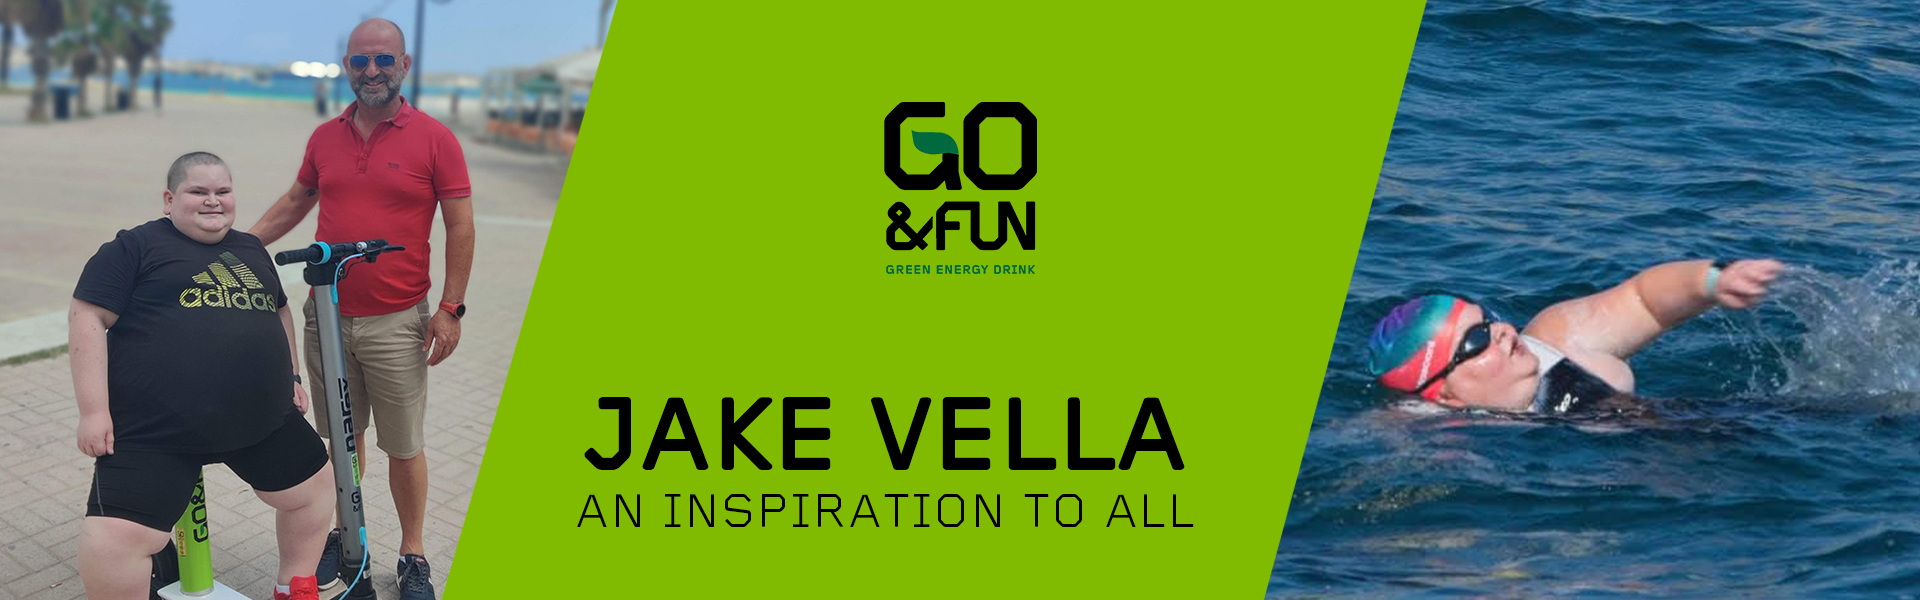 Jake Vella - An Inspiration to all